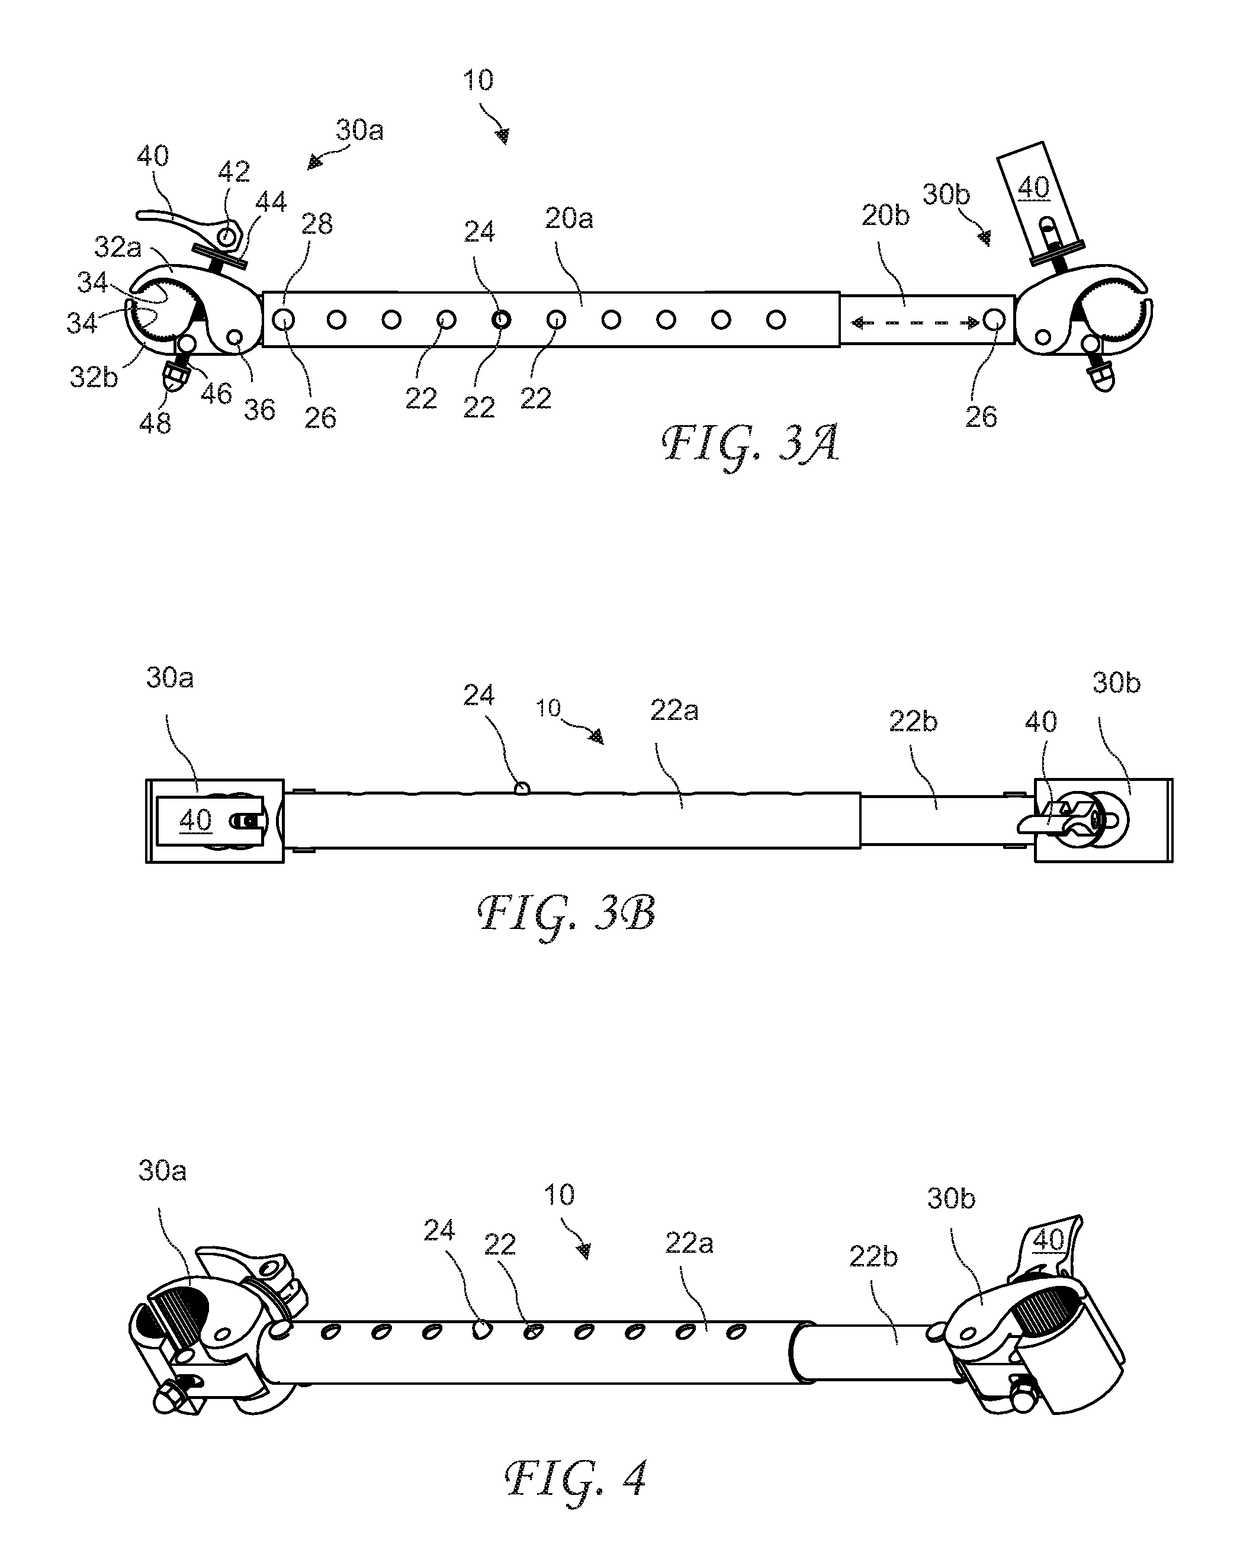 Apparatus and method for assisting patient walking therapy